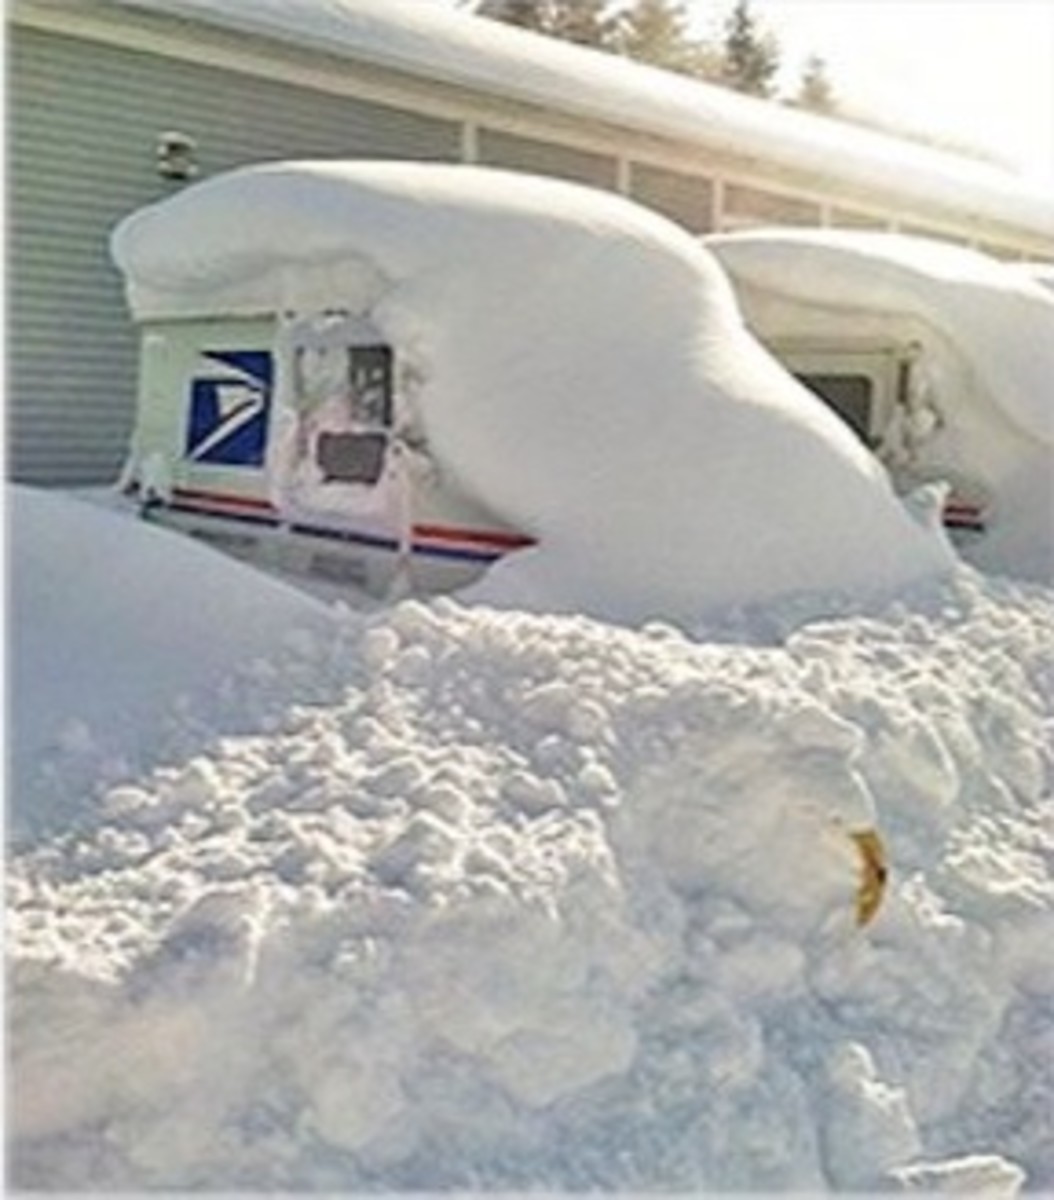 Does The Federal Hiring Freeze Affect The Post Office And Why Should Postal Workers Care?